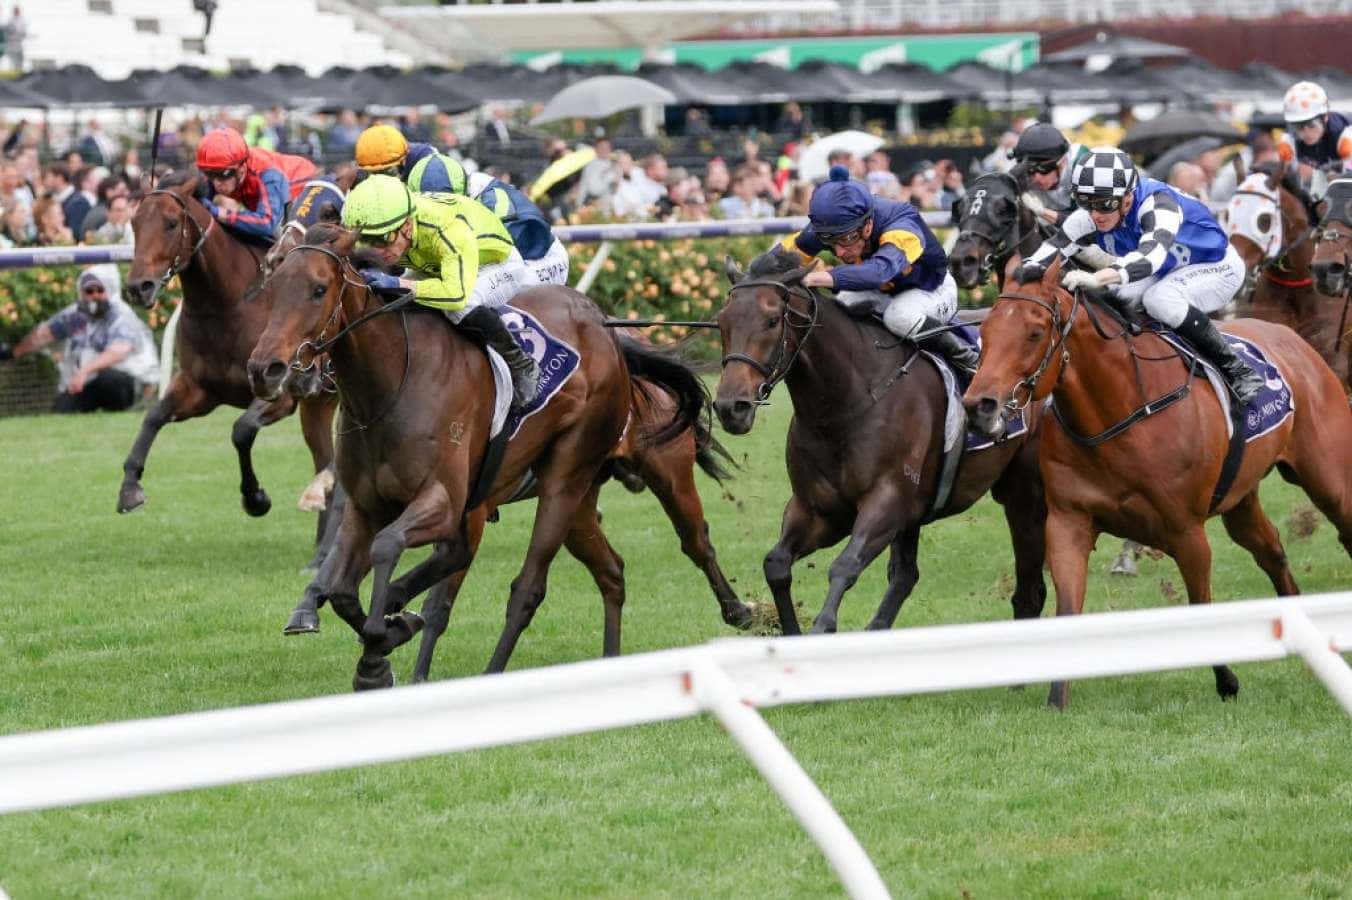 Exhilarating Horseracing At Melbourne Cup Day Wallpaper